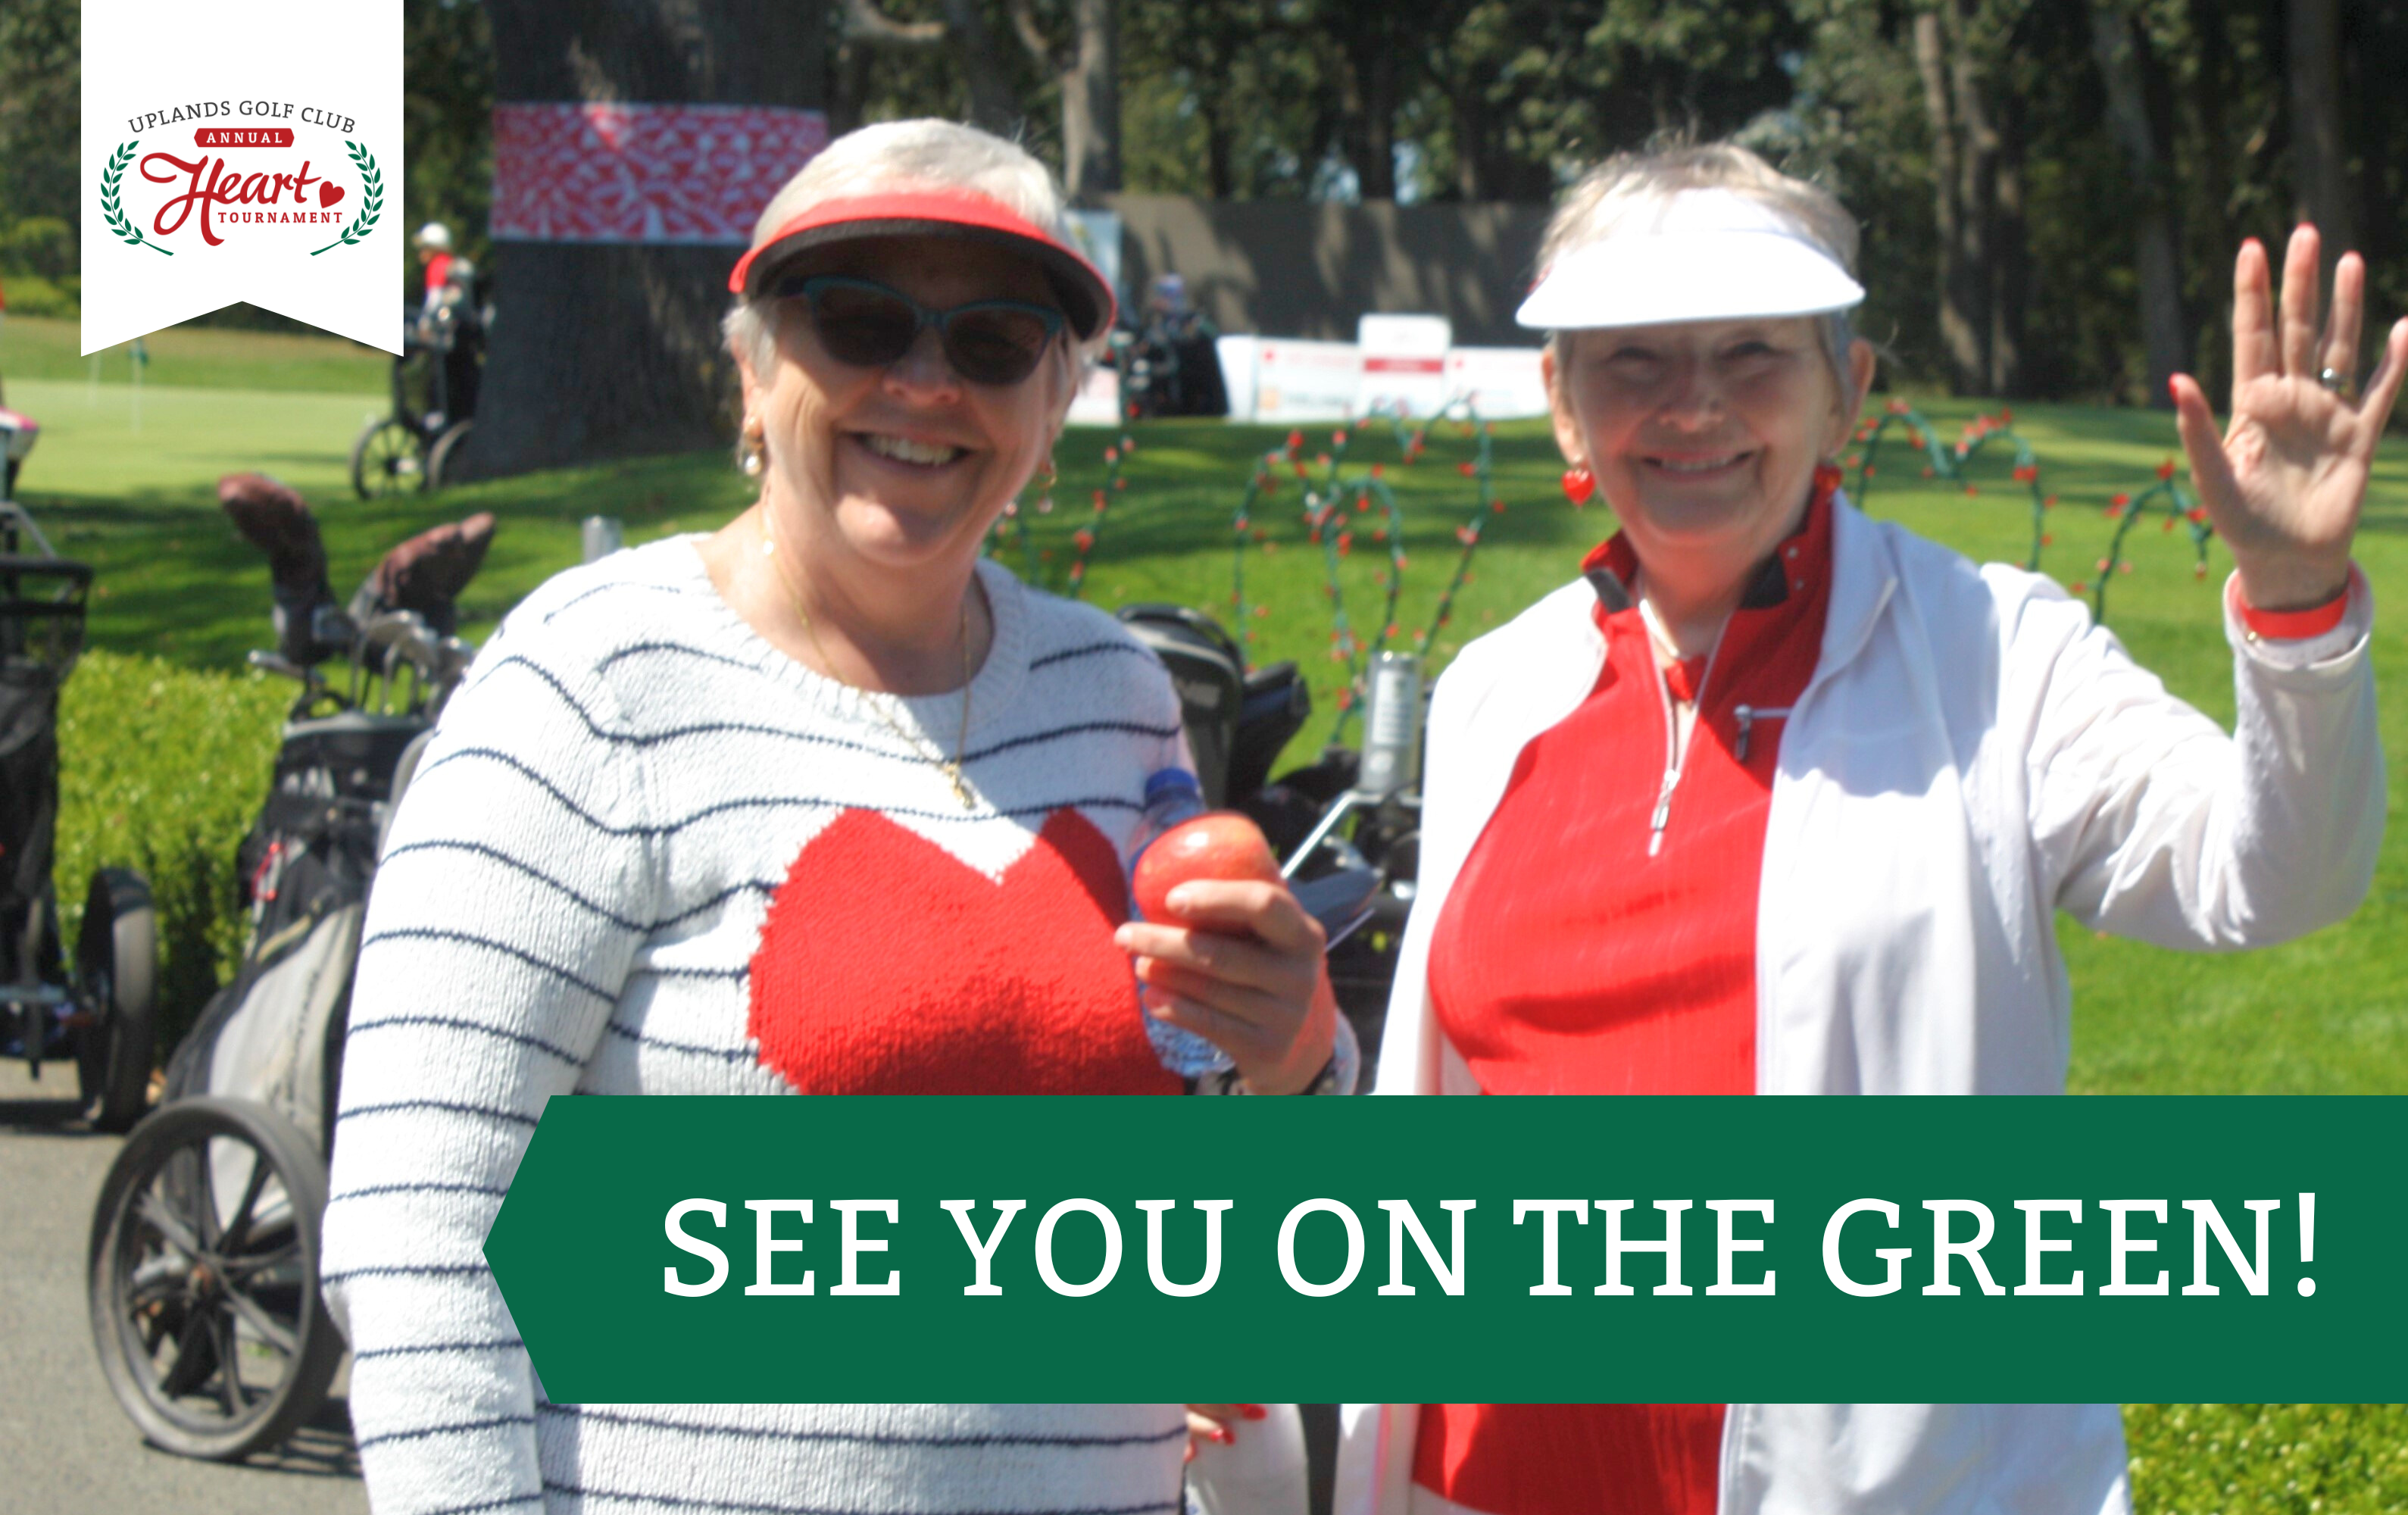 Two Golfers say "See you on the green!"